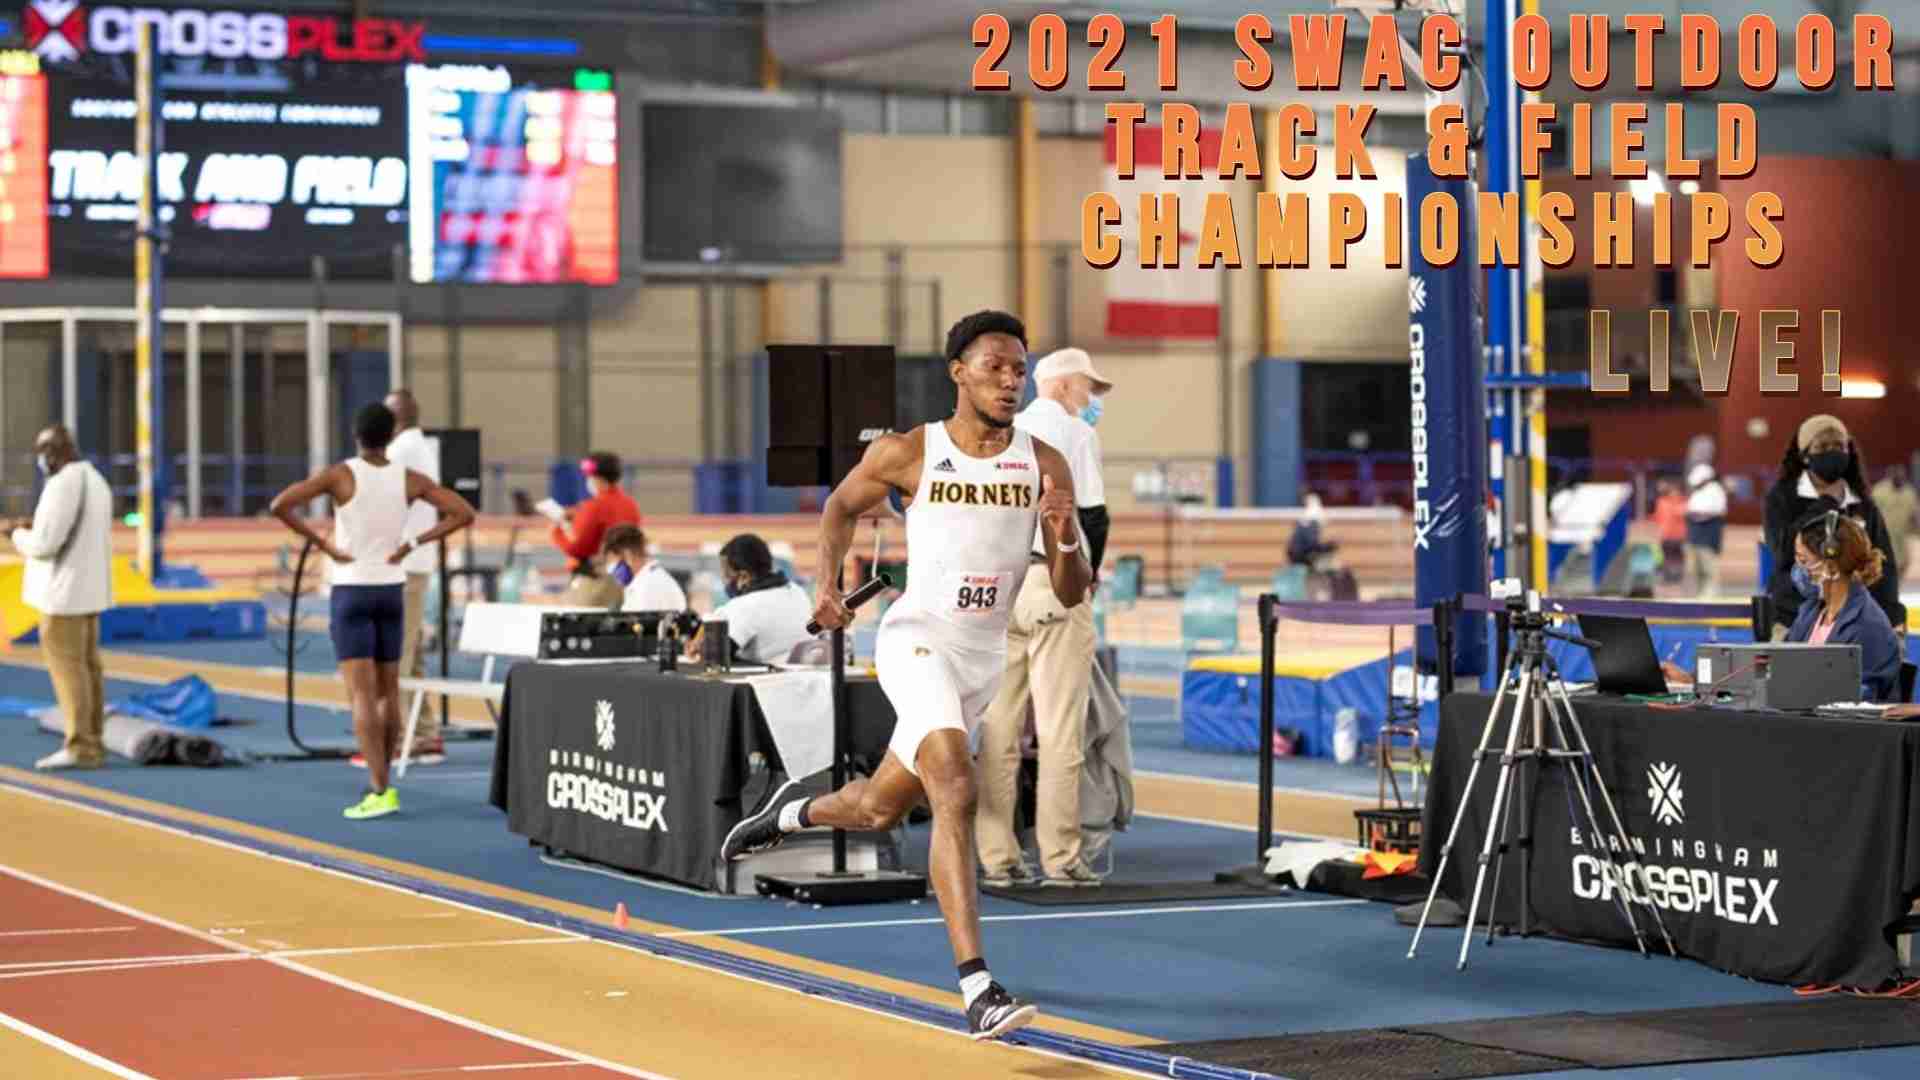 How You Can Follow 2021 SWAC Outdoor Championships WorldTrack and